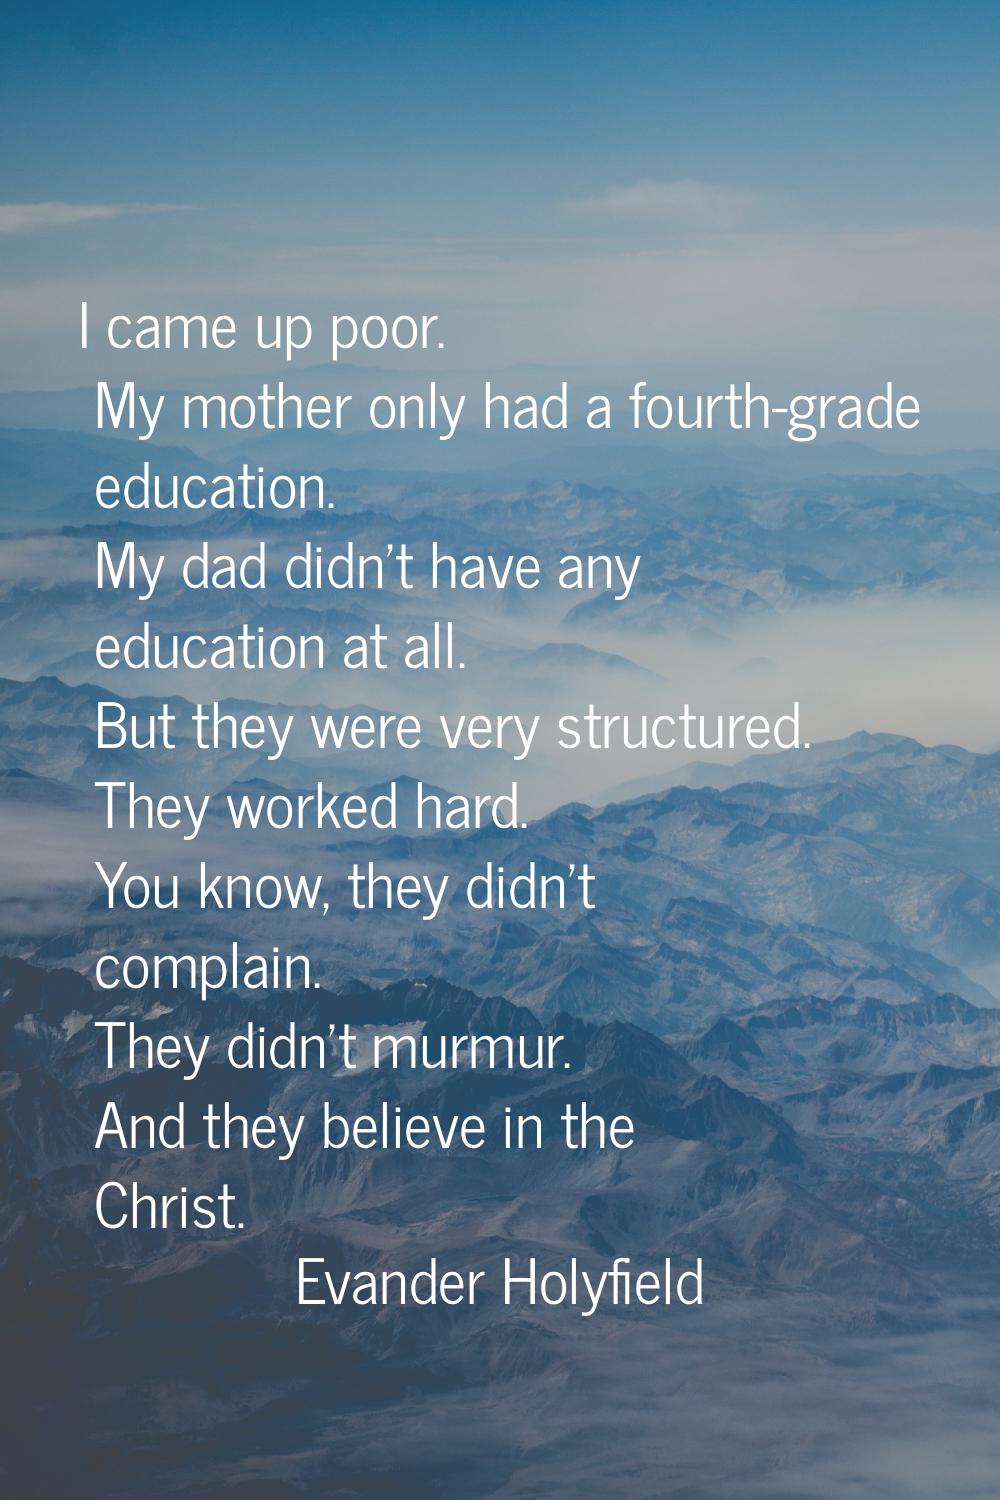 I came up poor. My mother only had a fourth-grade education. My dad didn't have any education at al